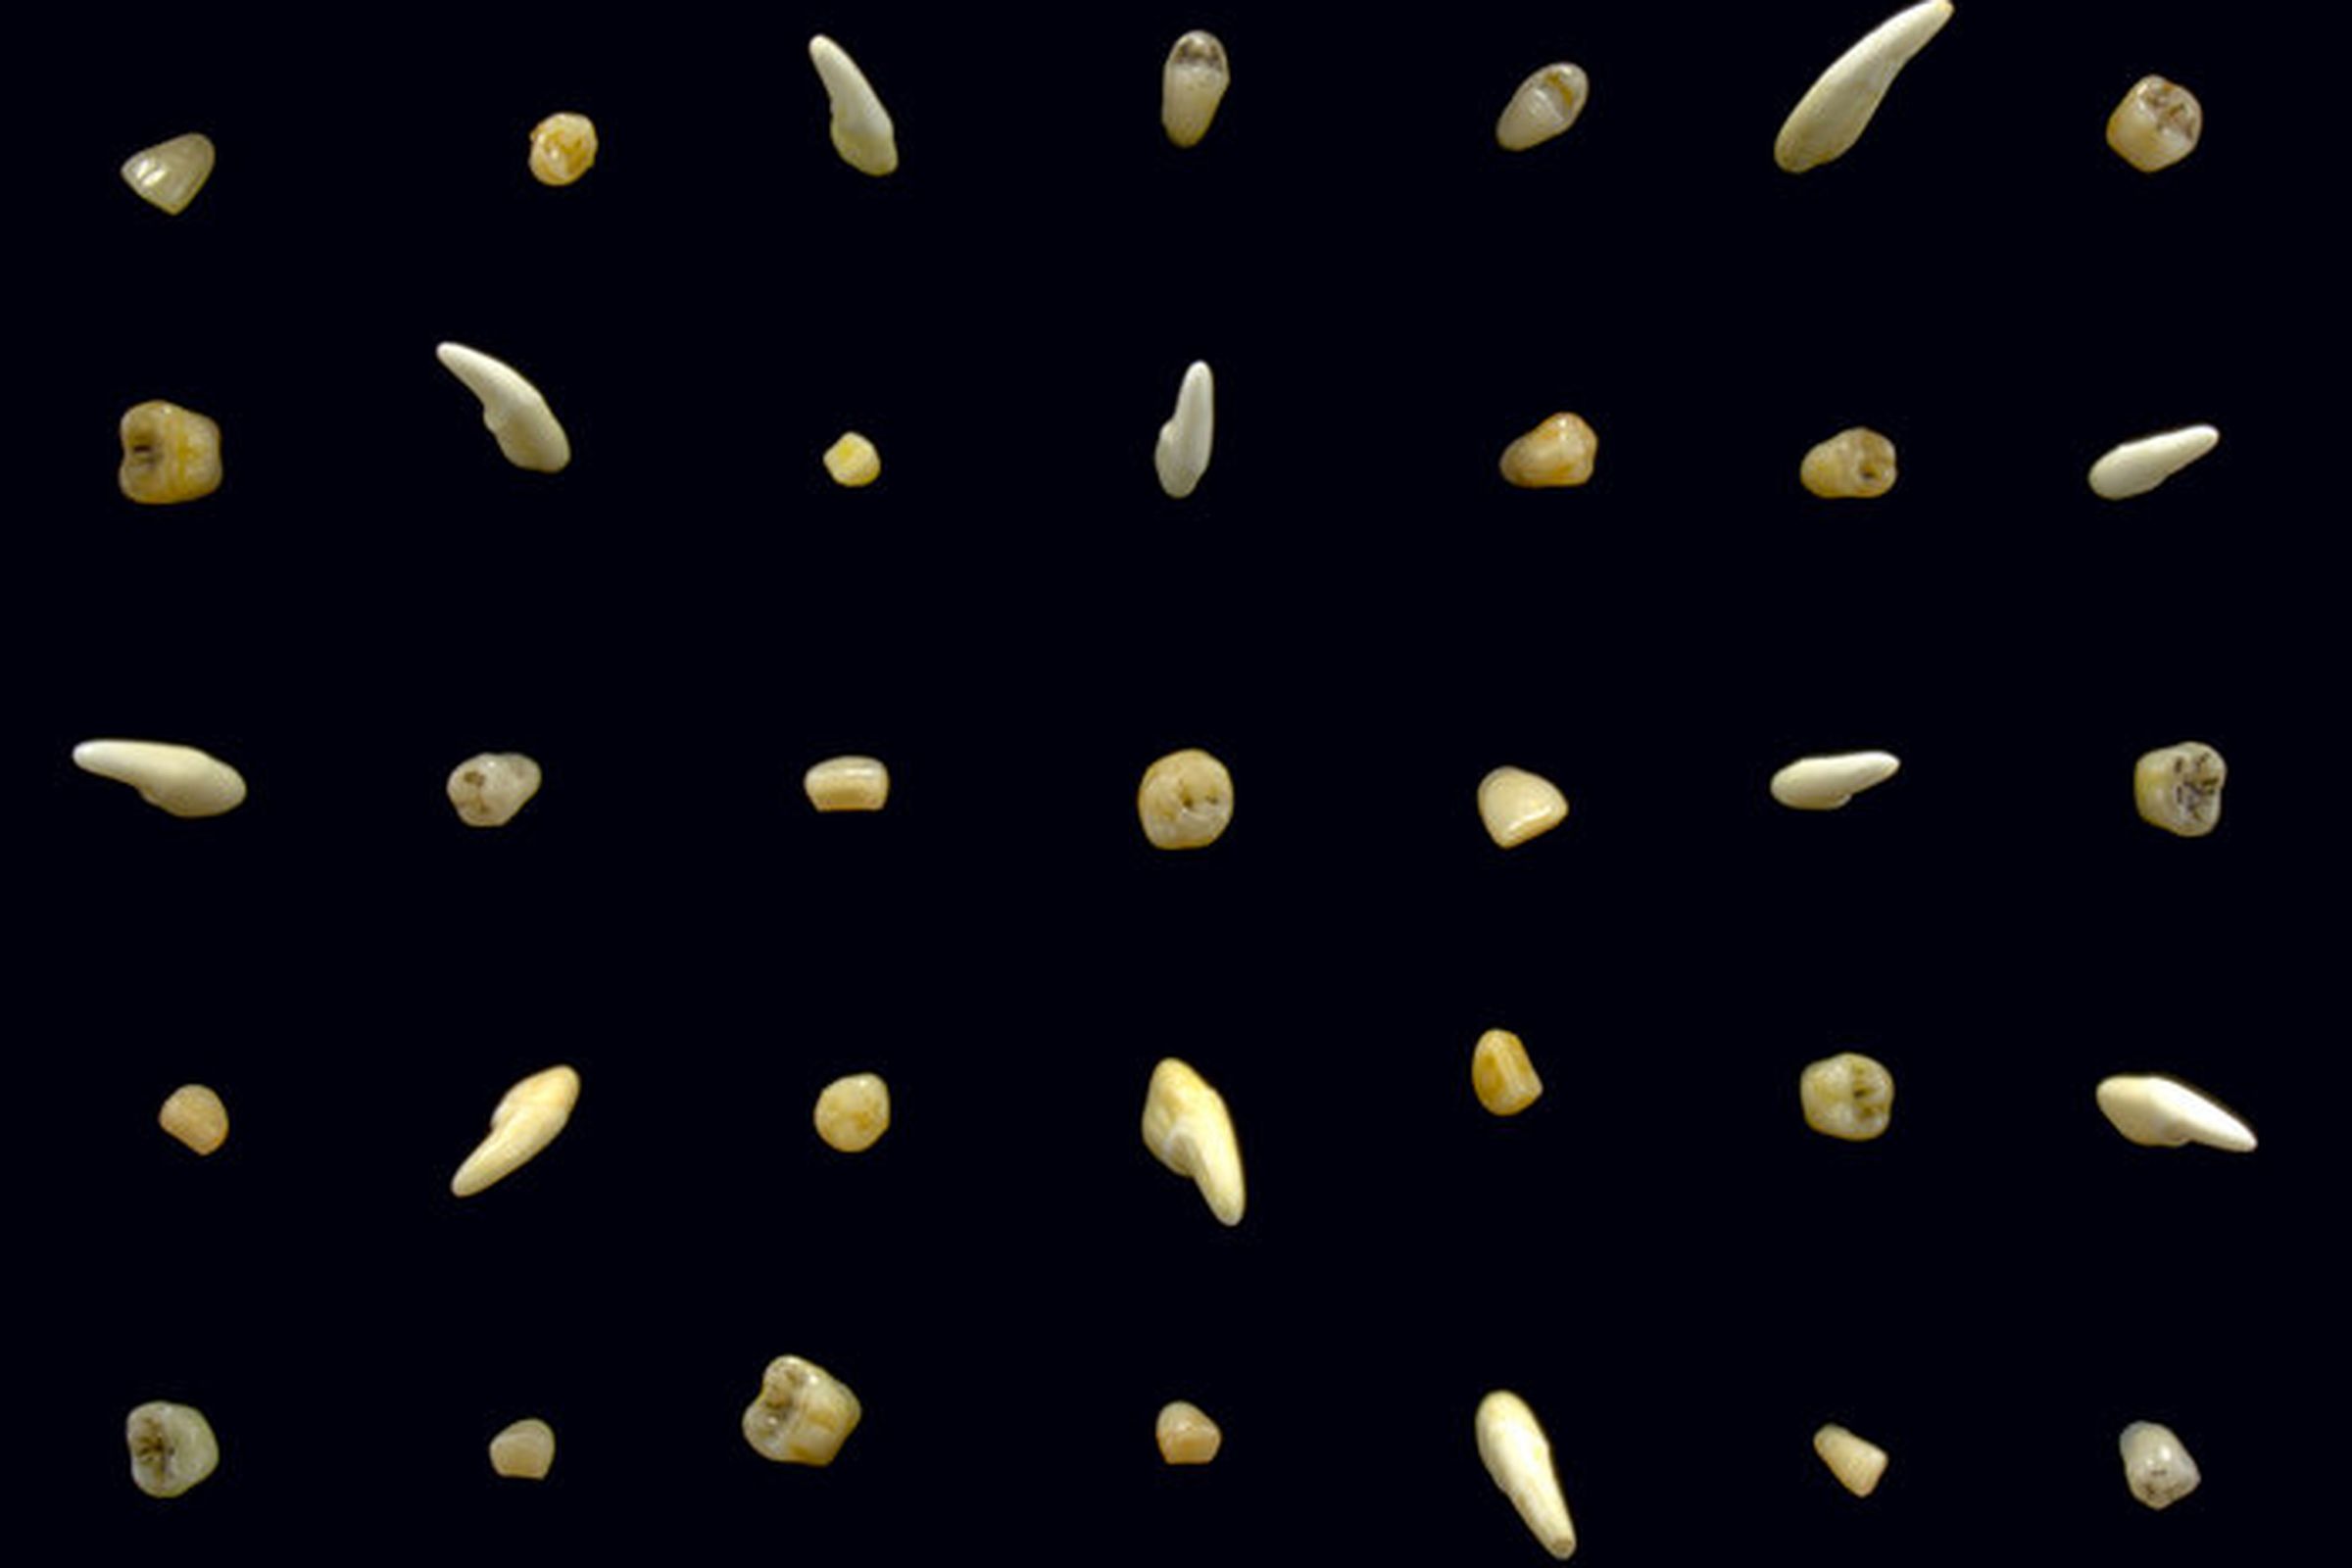 Rows of teeth against a black background